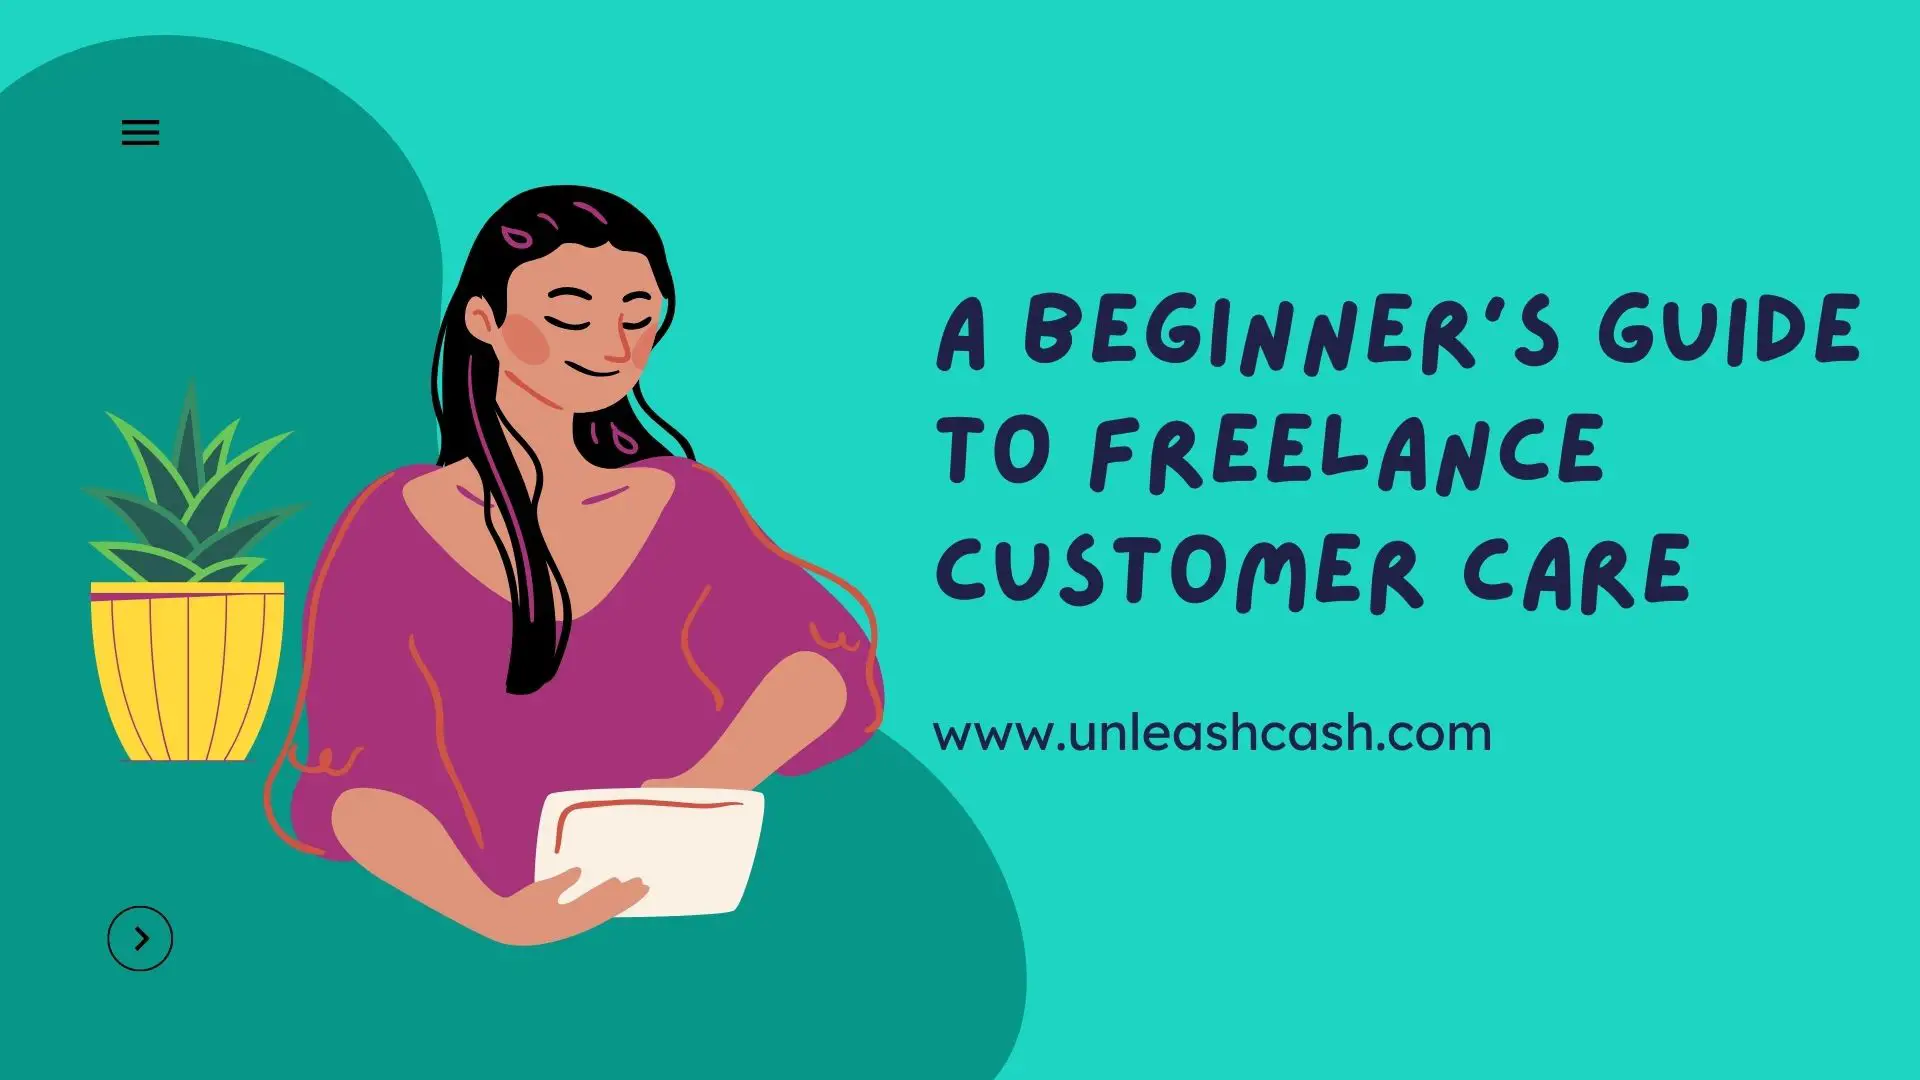 A Beginner's Guide To Freelance Customer Care